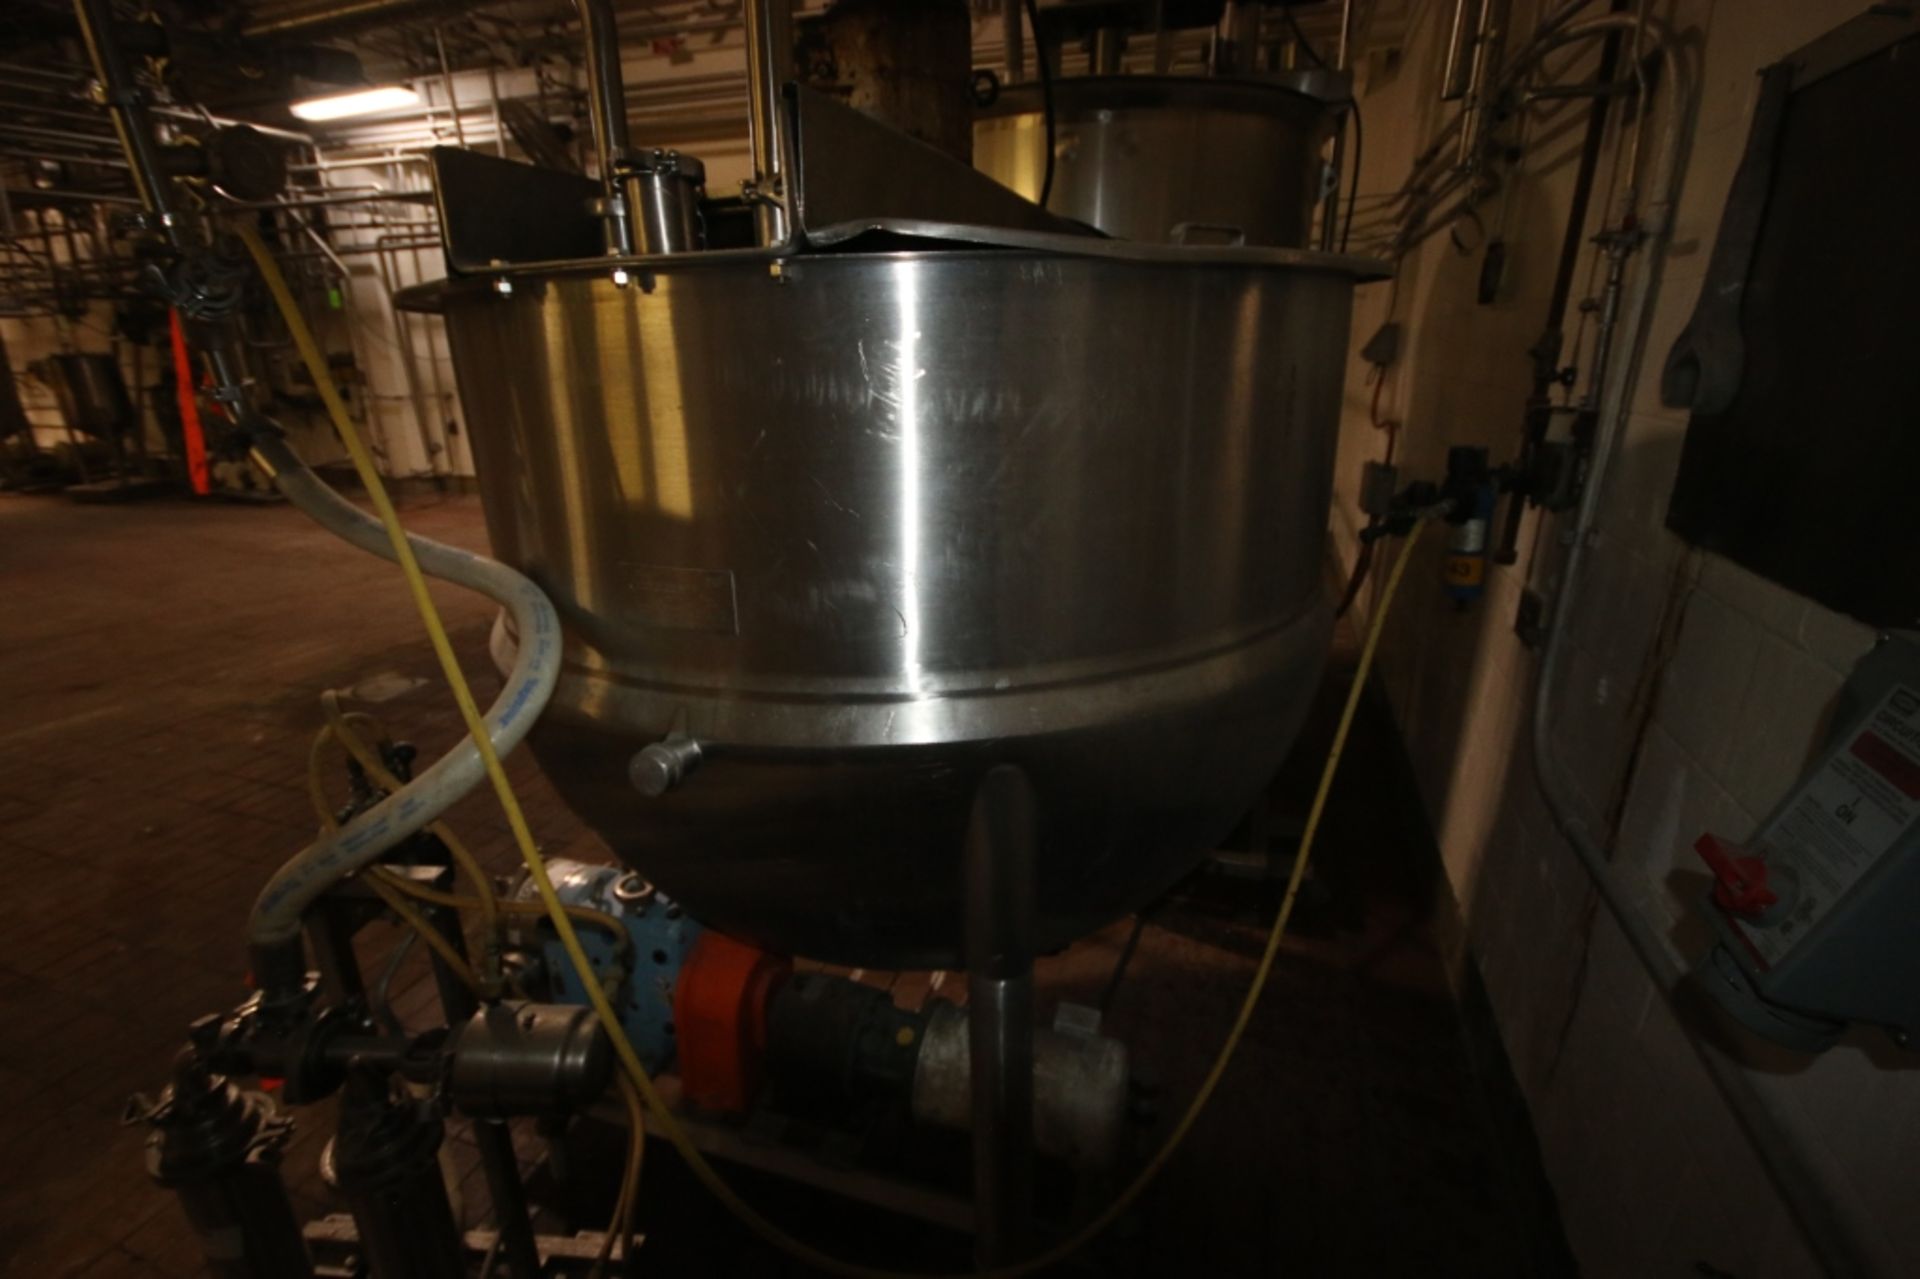 Lee 400 Gal. S/S Kettle,M/N 400 D10S, S/N B2726-C, Jacket 100 PSI @ 338 F 155 PSI, with Top - Image 6 of 13